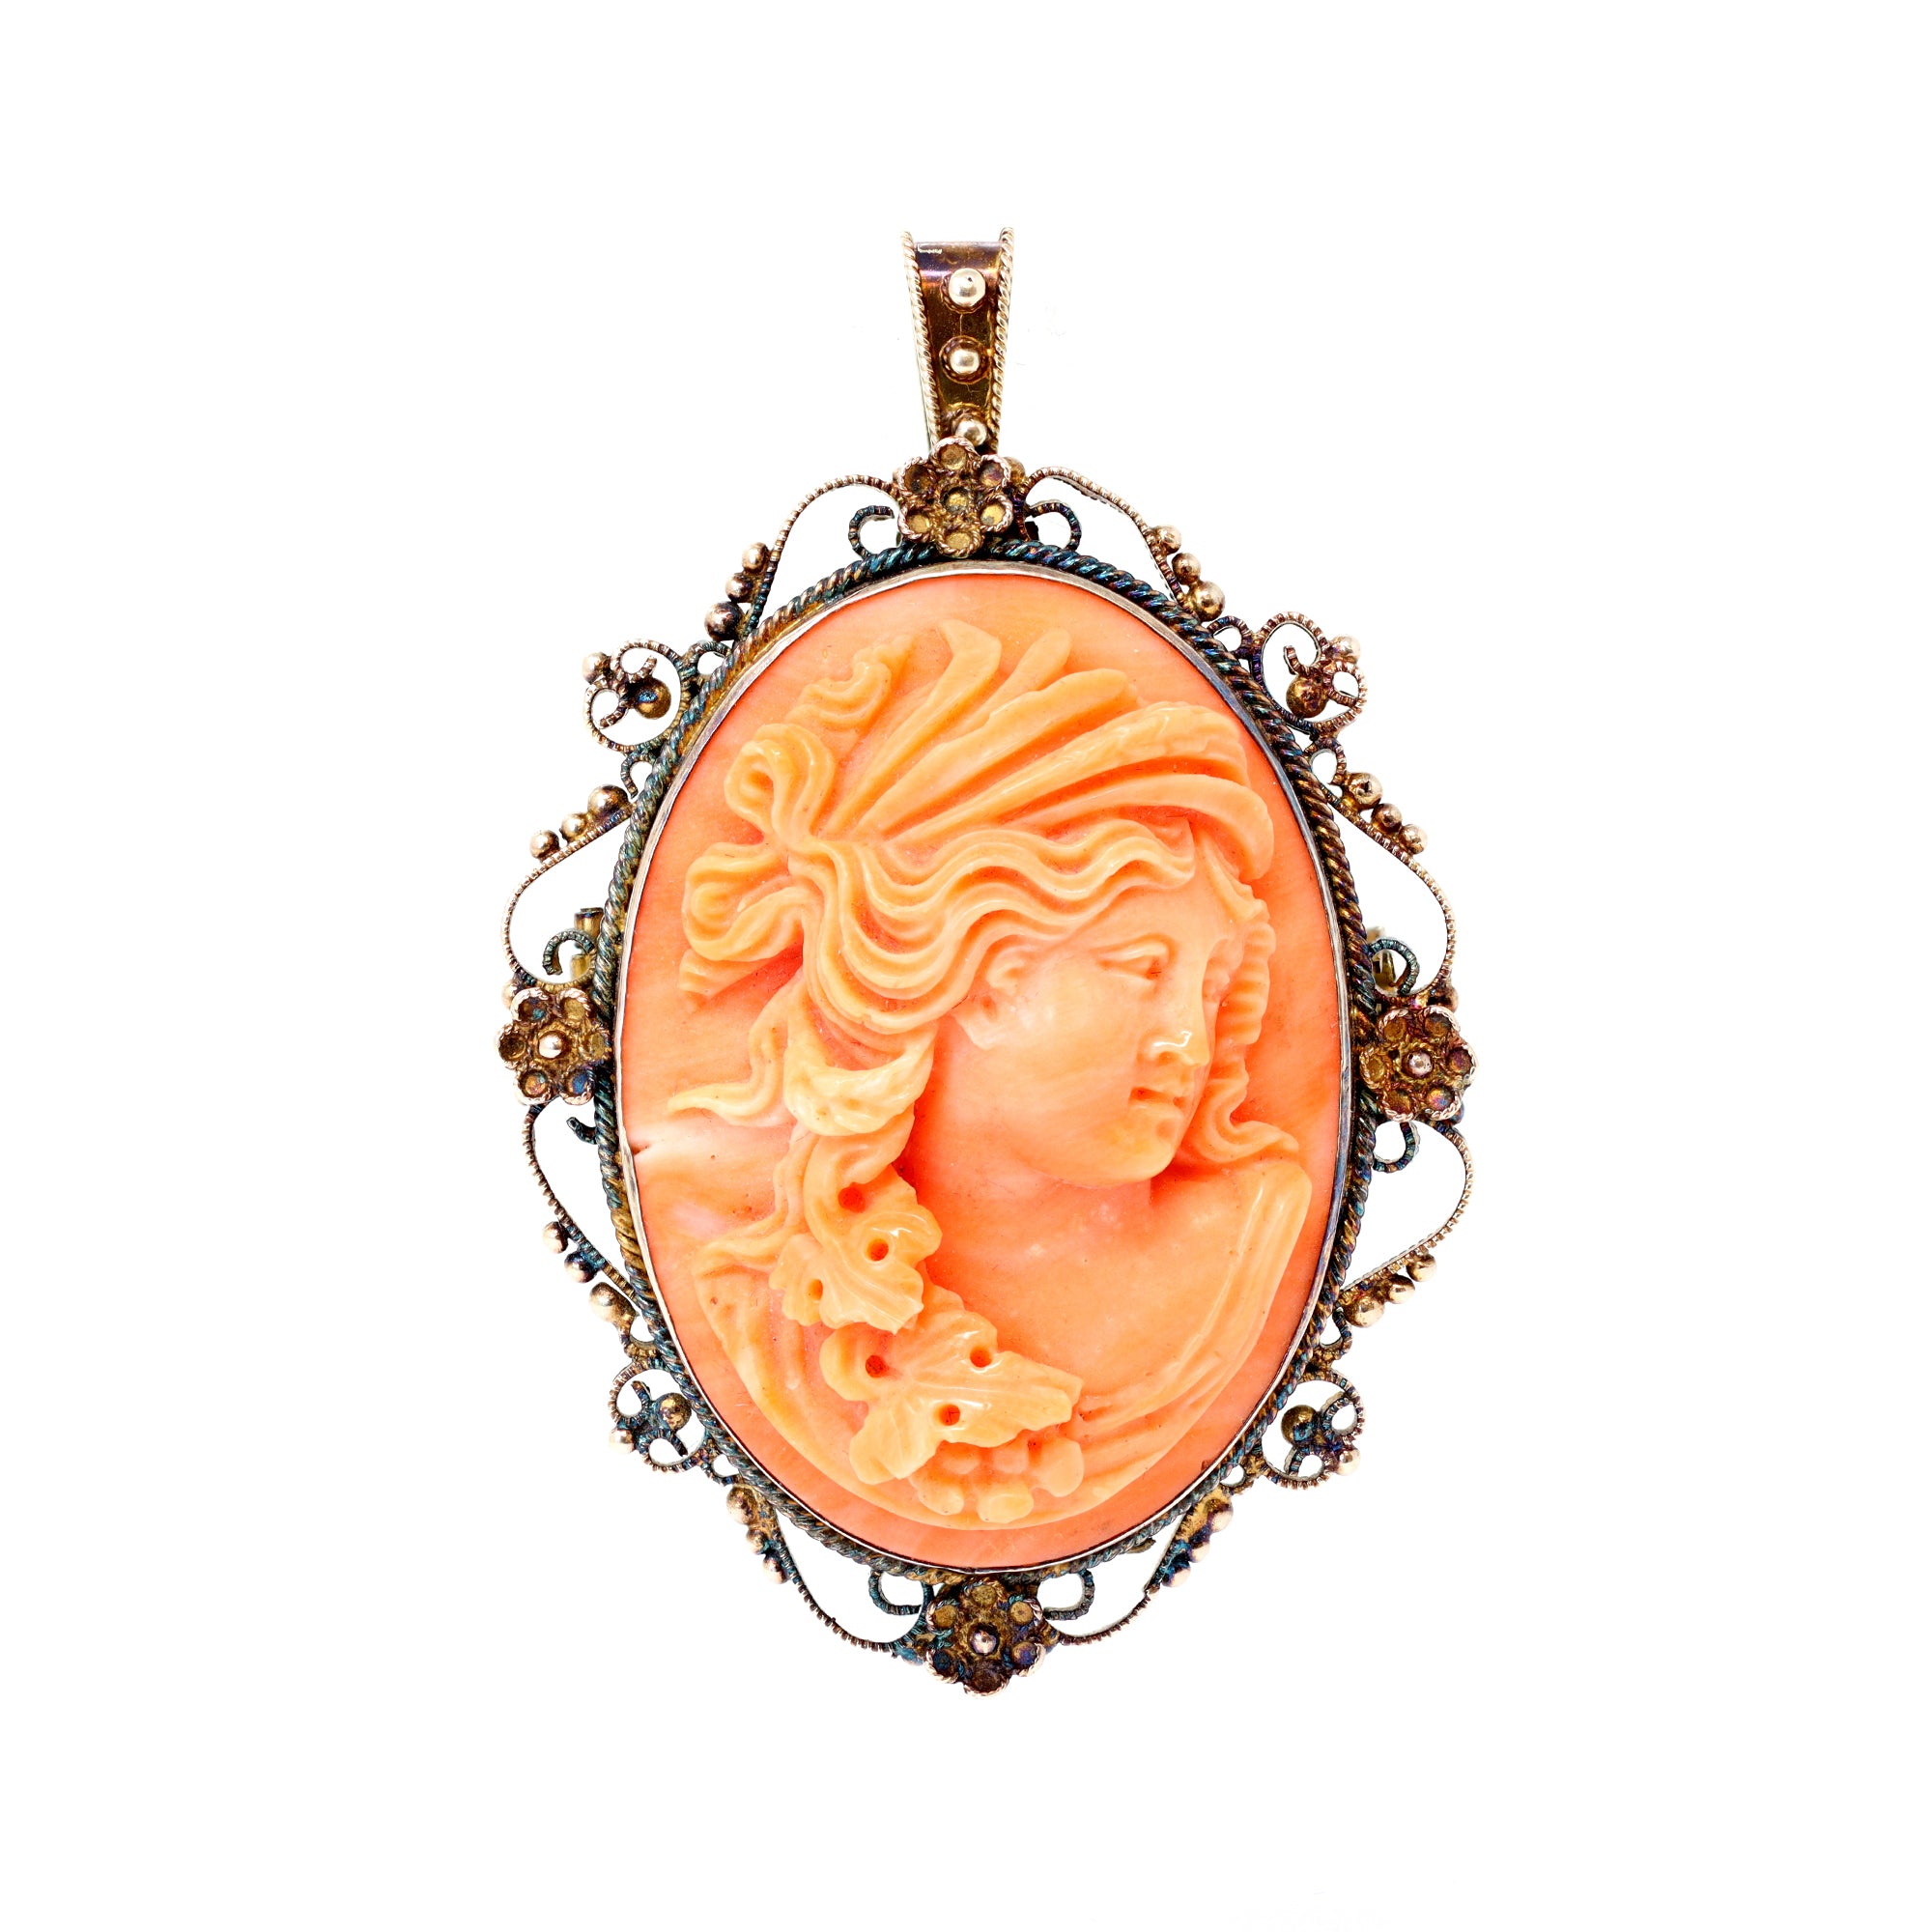 Antique-italian-coral-cameo-pendant-broooch-front-view-2000x2000.jpg